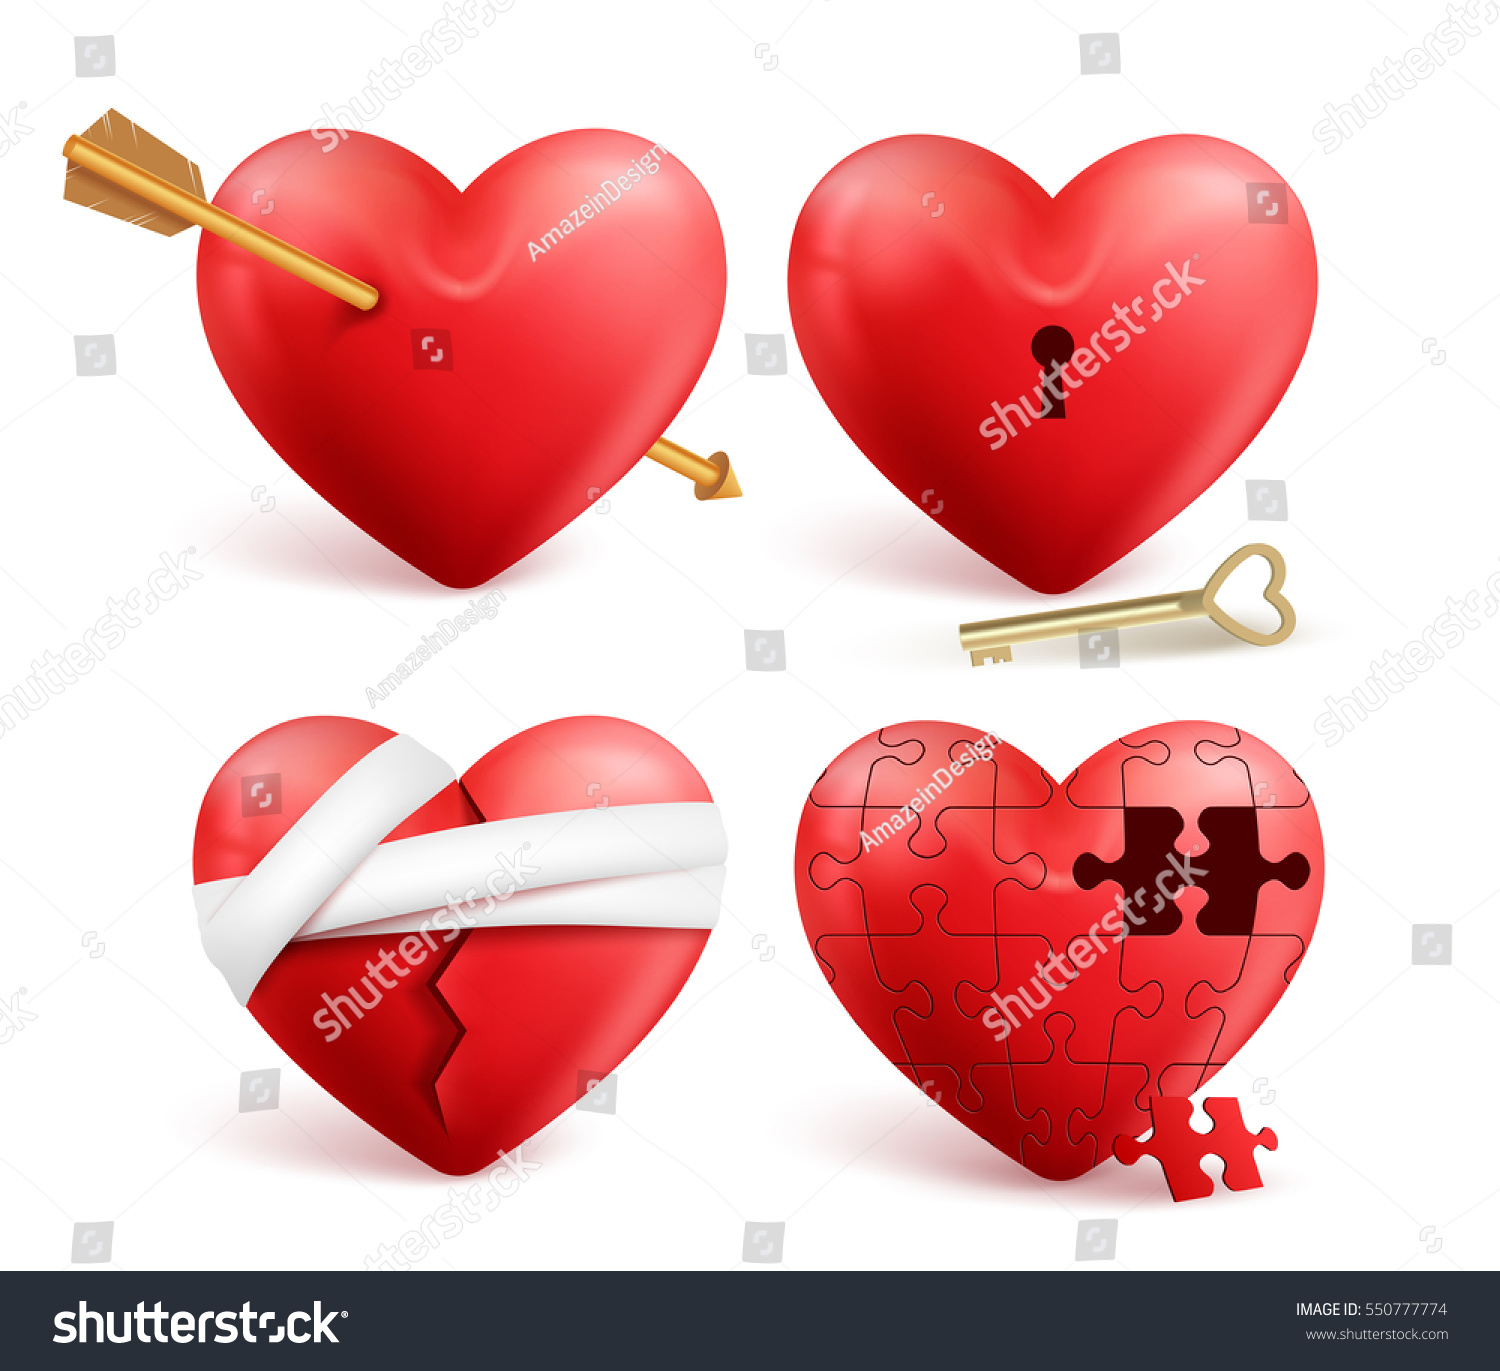 SVG of Red hearts vector 3d realistic set with arrows, key holes, puzzle and bandages for valentines day isolated in white background. Vector illustration.
 svg